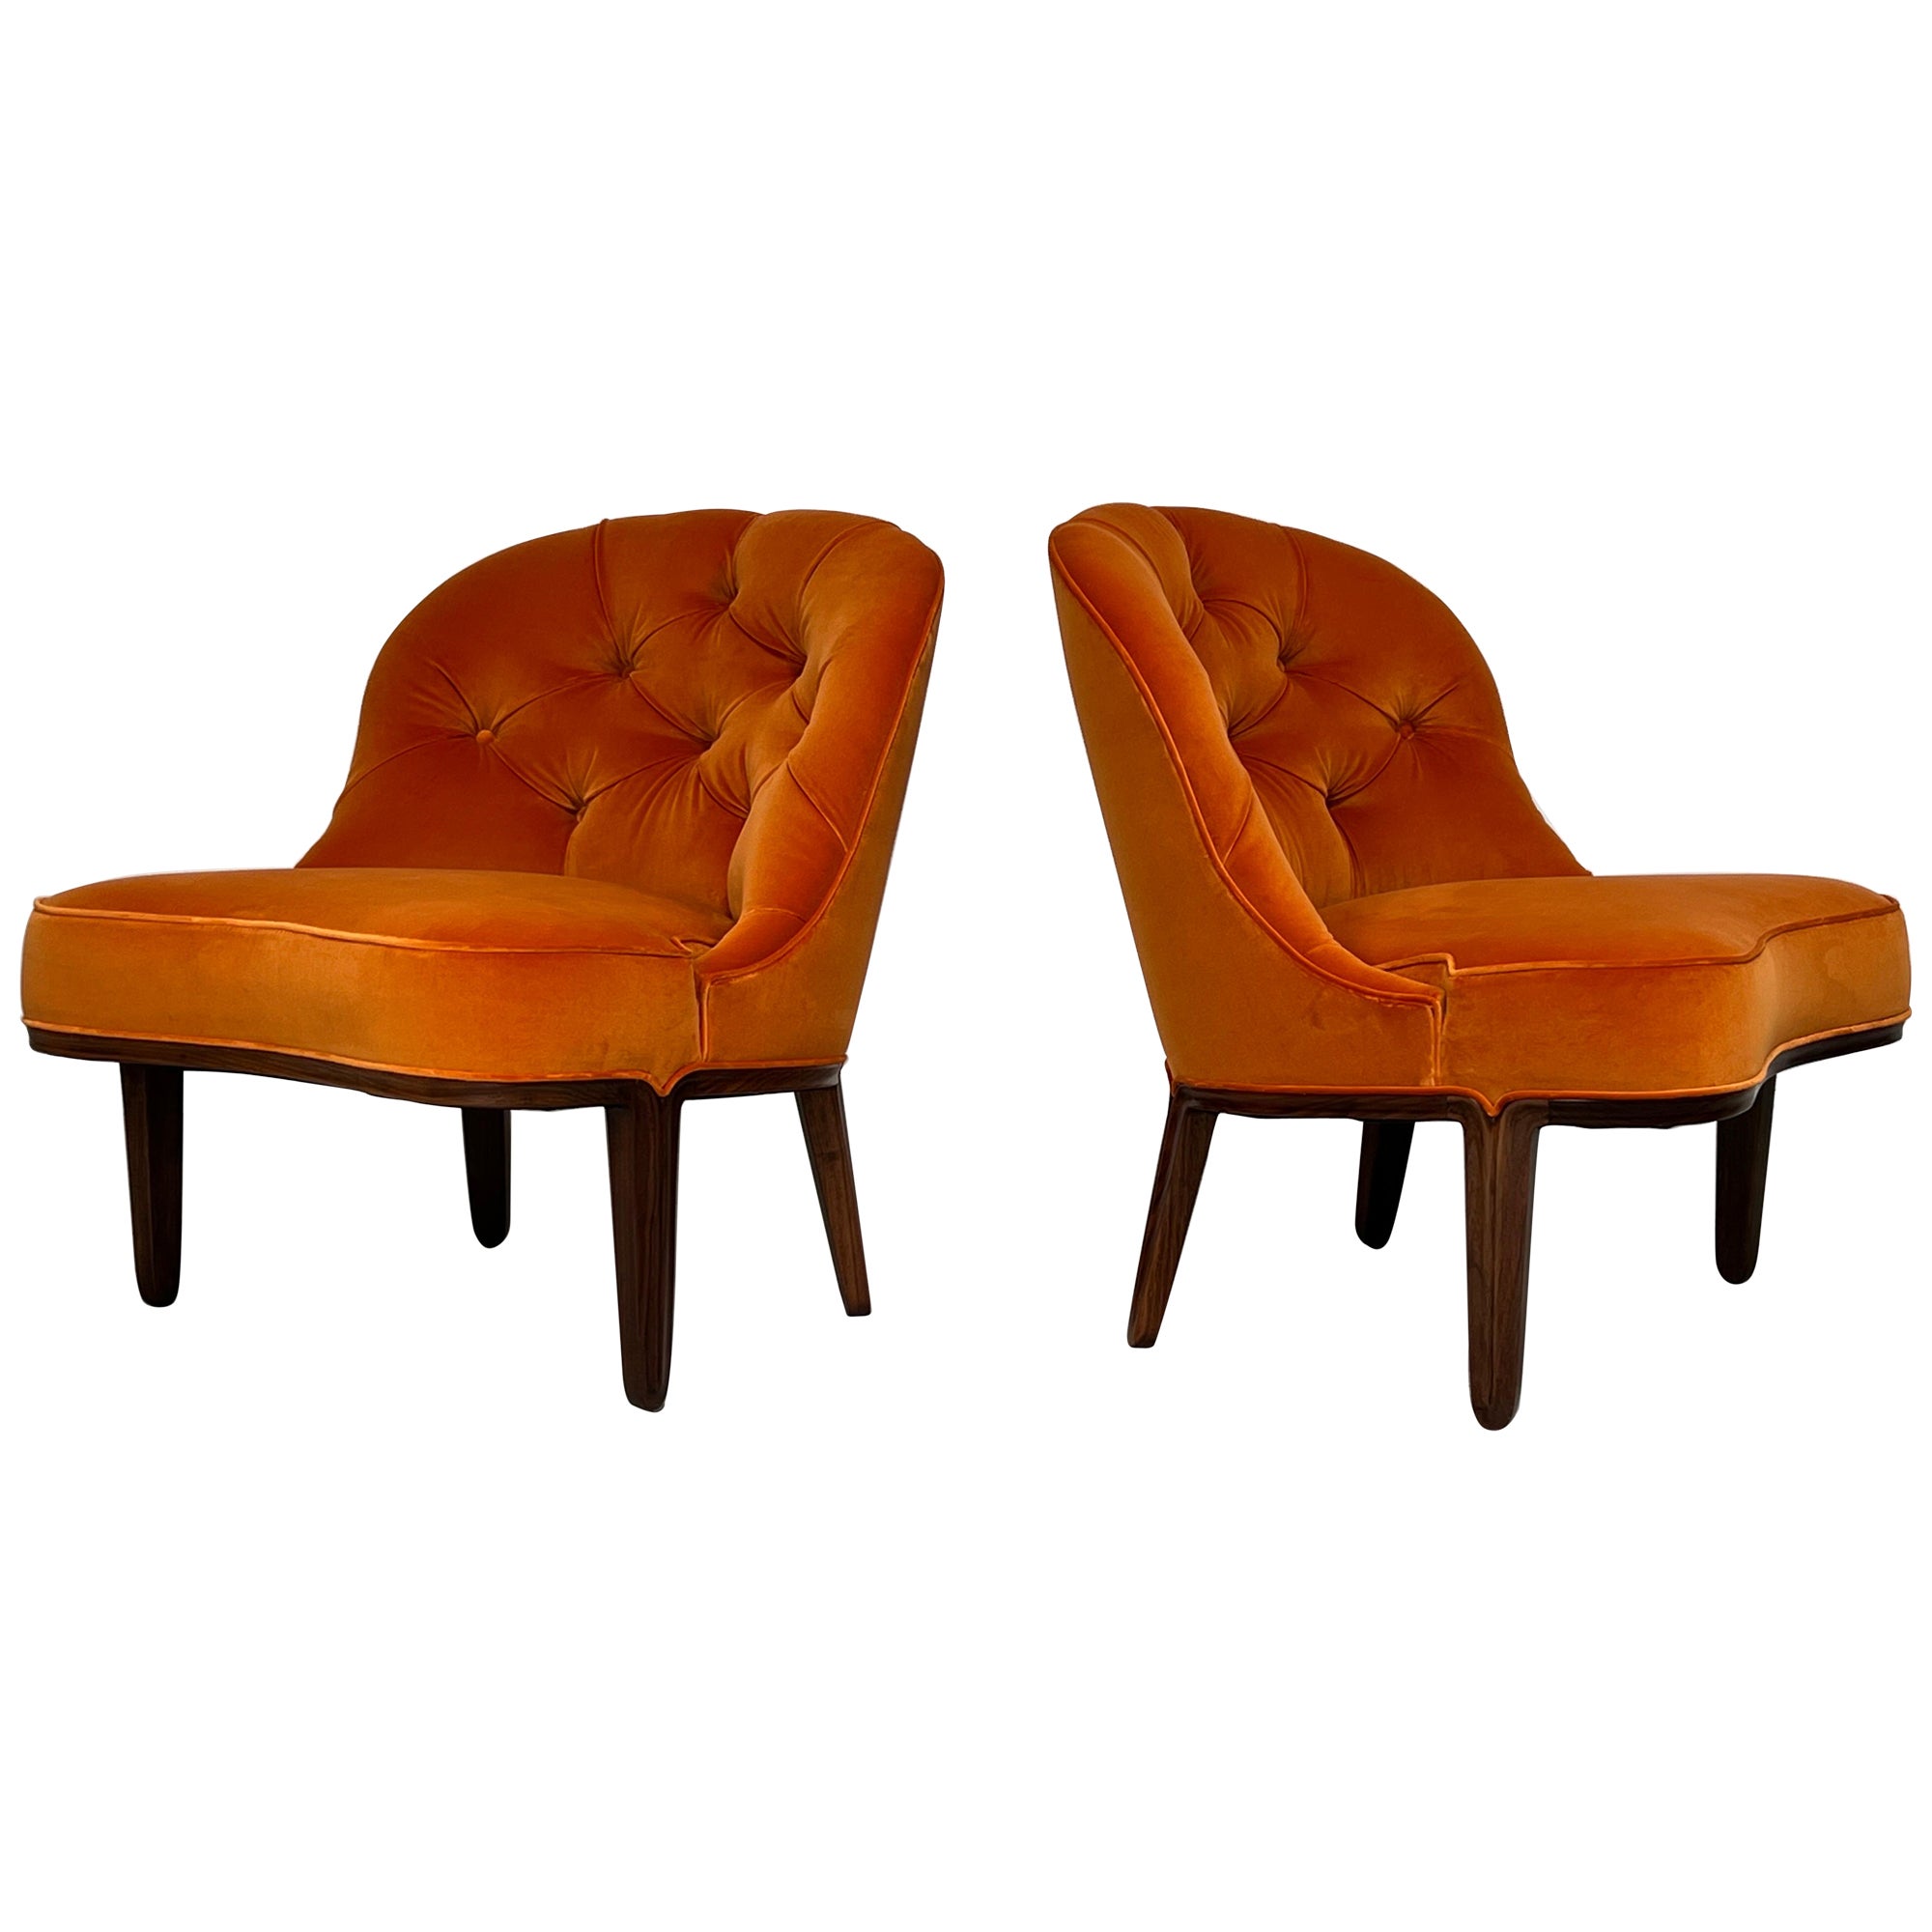 Pair of Dunbar Janus Slipper Chairs by Edward Wormley For Sale